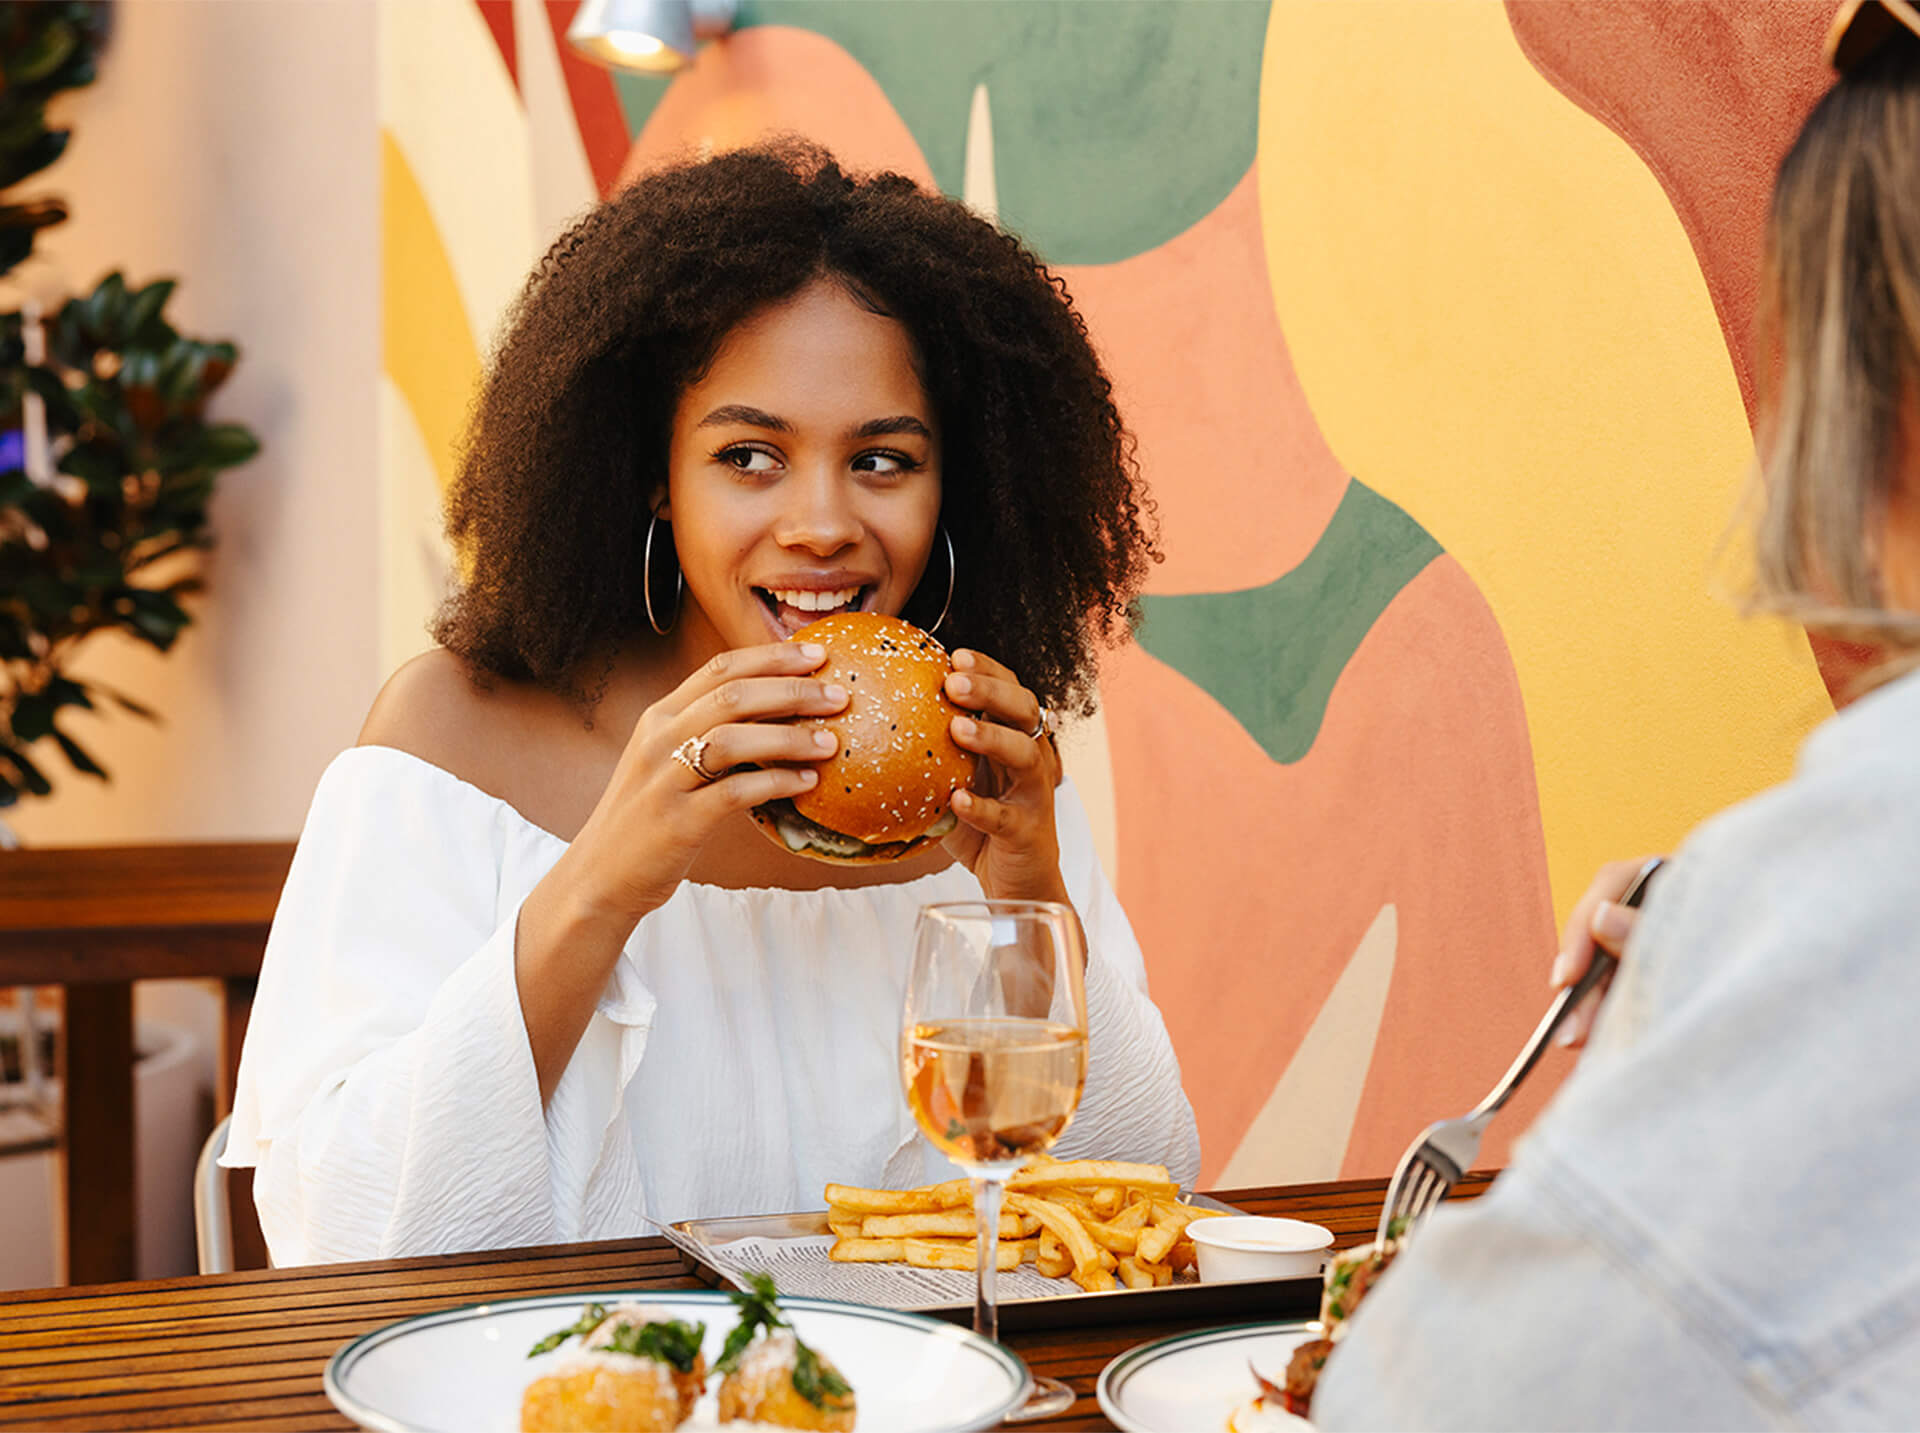 A woman enjoying a delicious burger and fries at a restaurant, savouring every bite with a smile on her face.